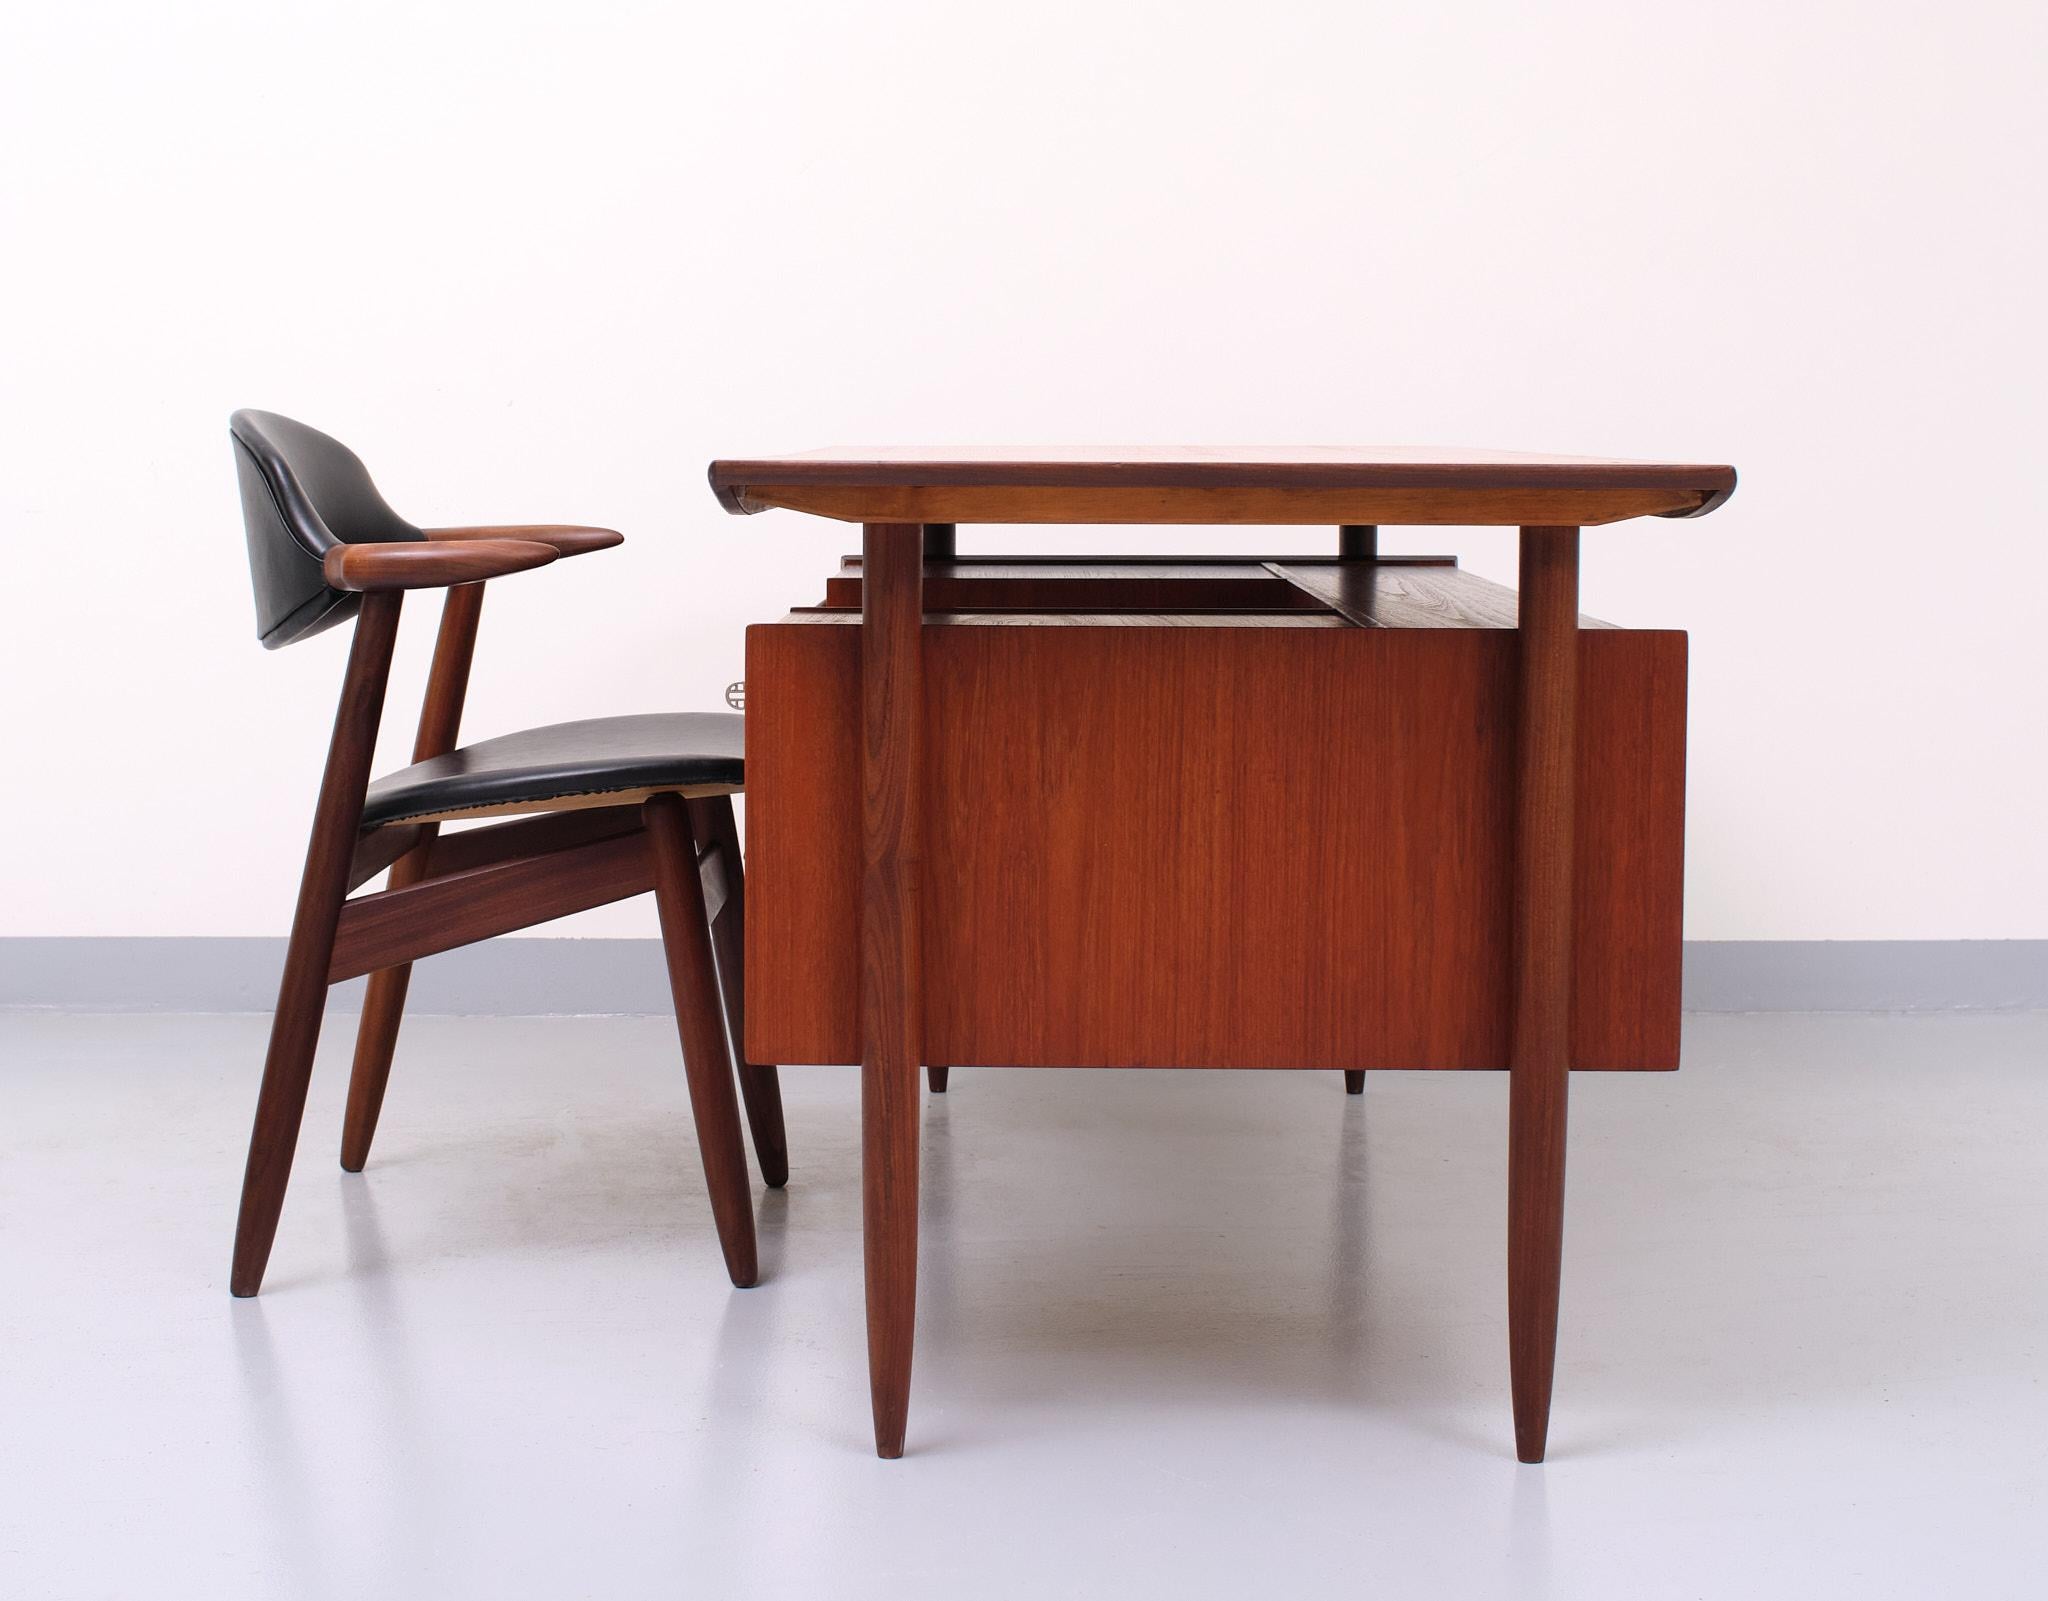 Beautiful teak desk and matching cow horn chair. The desk designed by Tijsseling for Hulmefa 
Model Probus early 1960s. The top seems to be floating. On the backside a bookcase. So the desk can be 
free standing in the room. The cow horn chair in